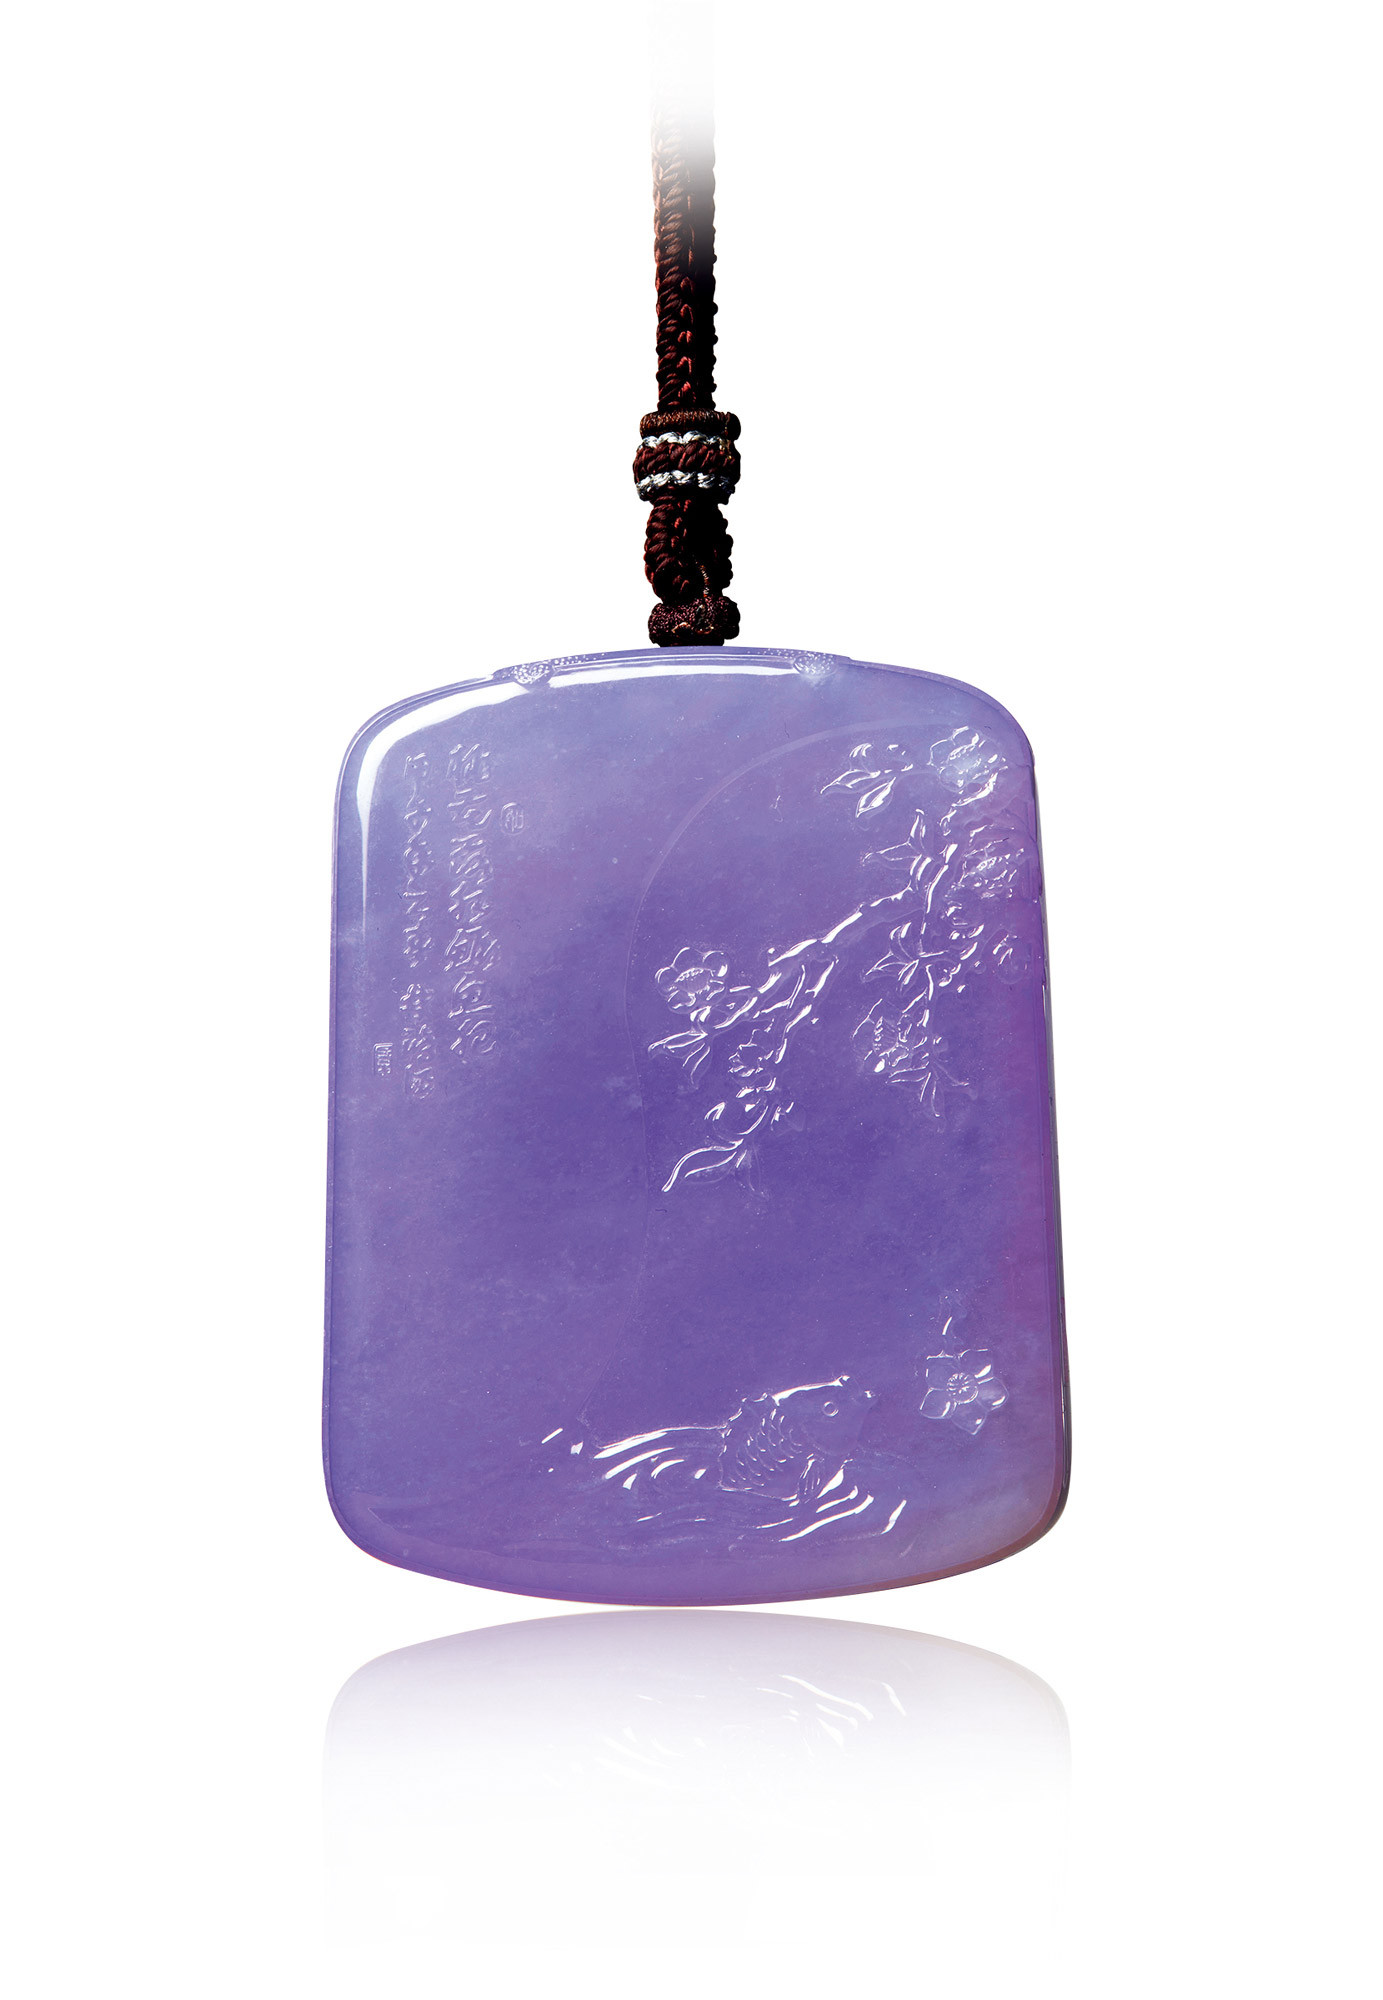 AN IMPORTANT AND VERY FINE LAVENDER JADEITE PENDANT